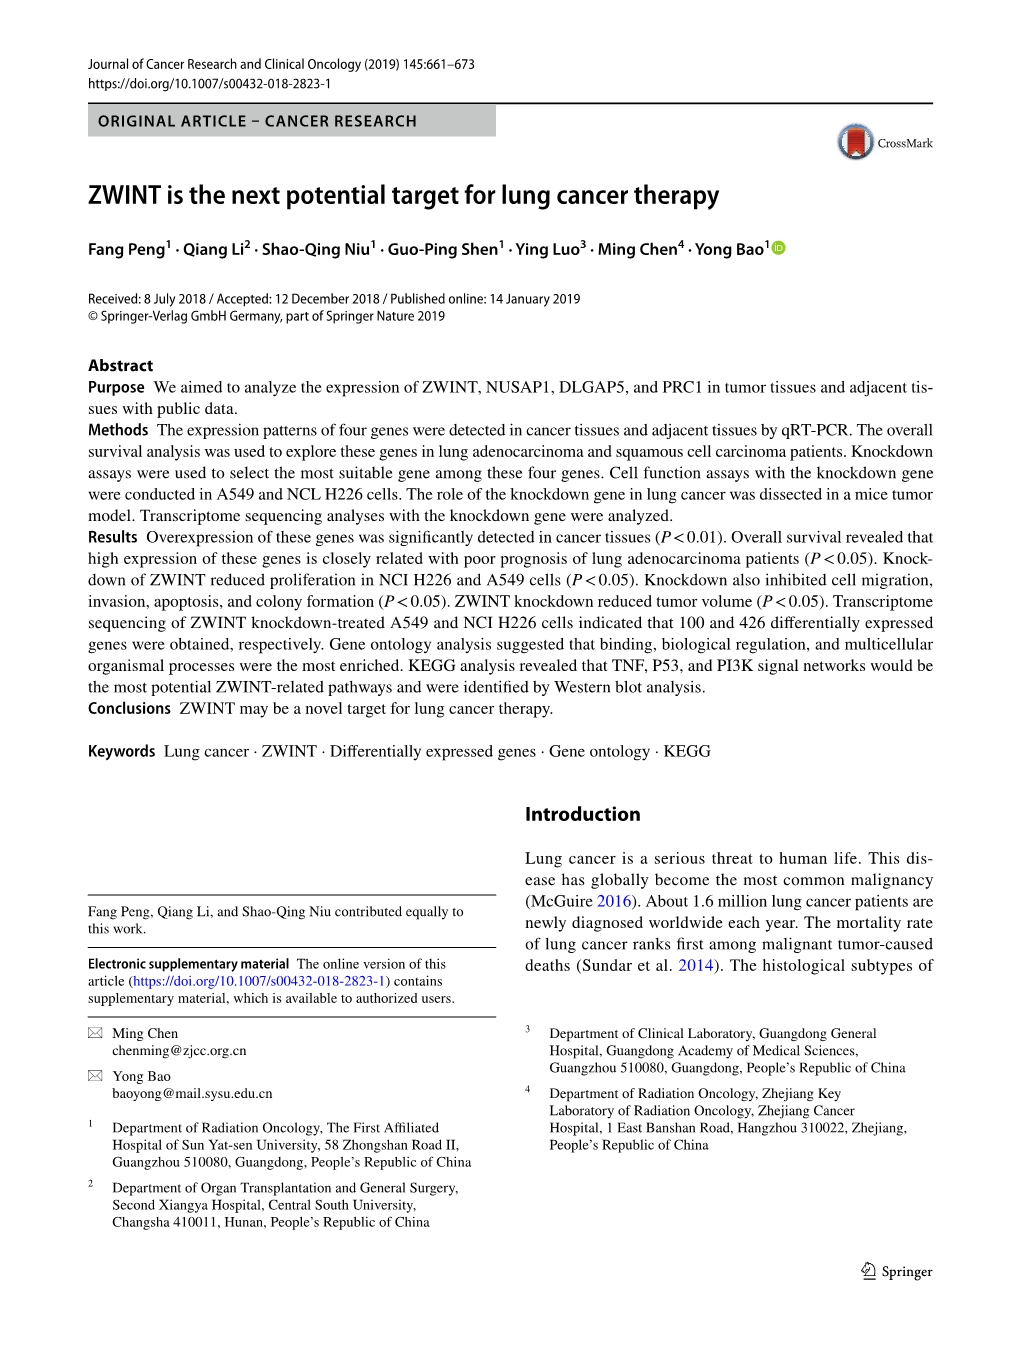 ZWINT Is the Next Potential Target for Lung Cancer Therapy